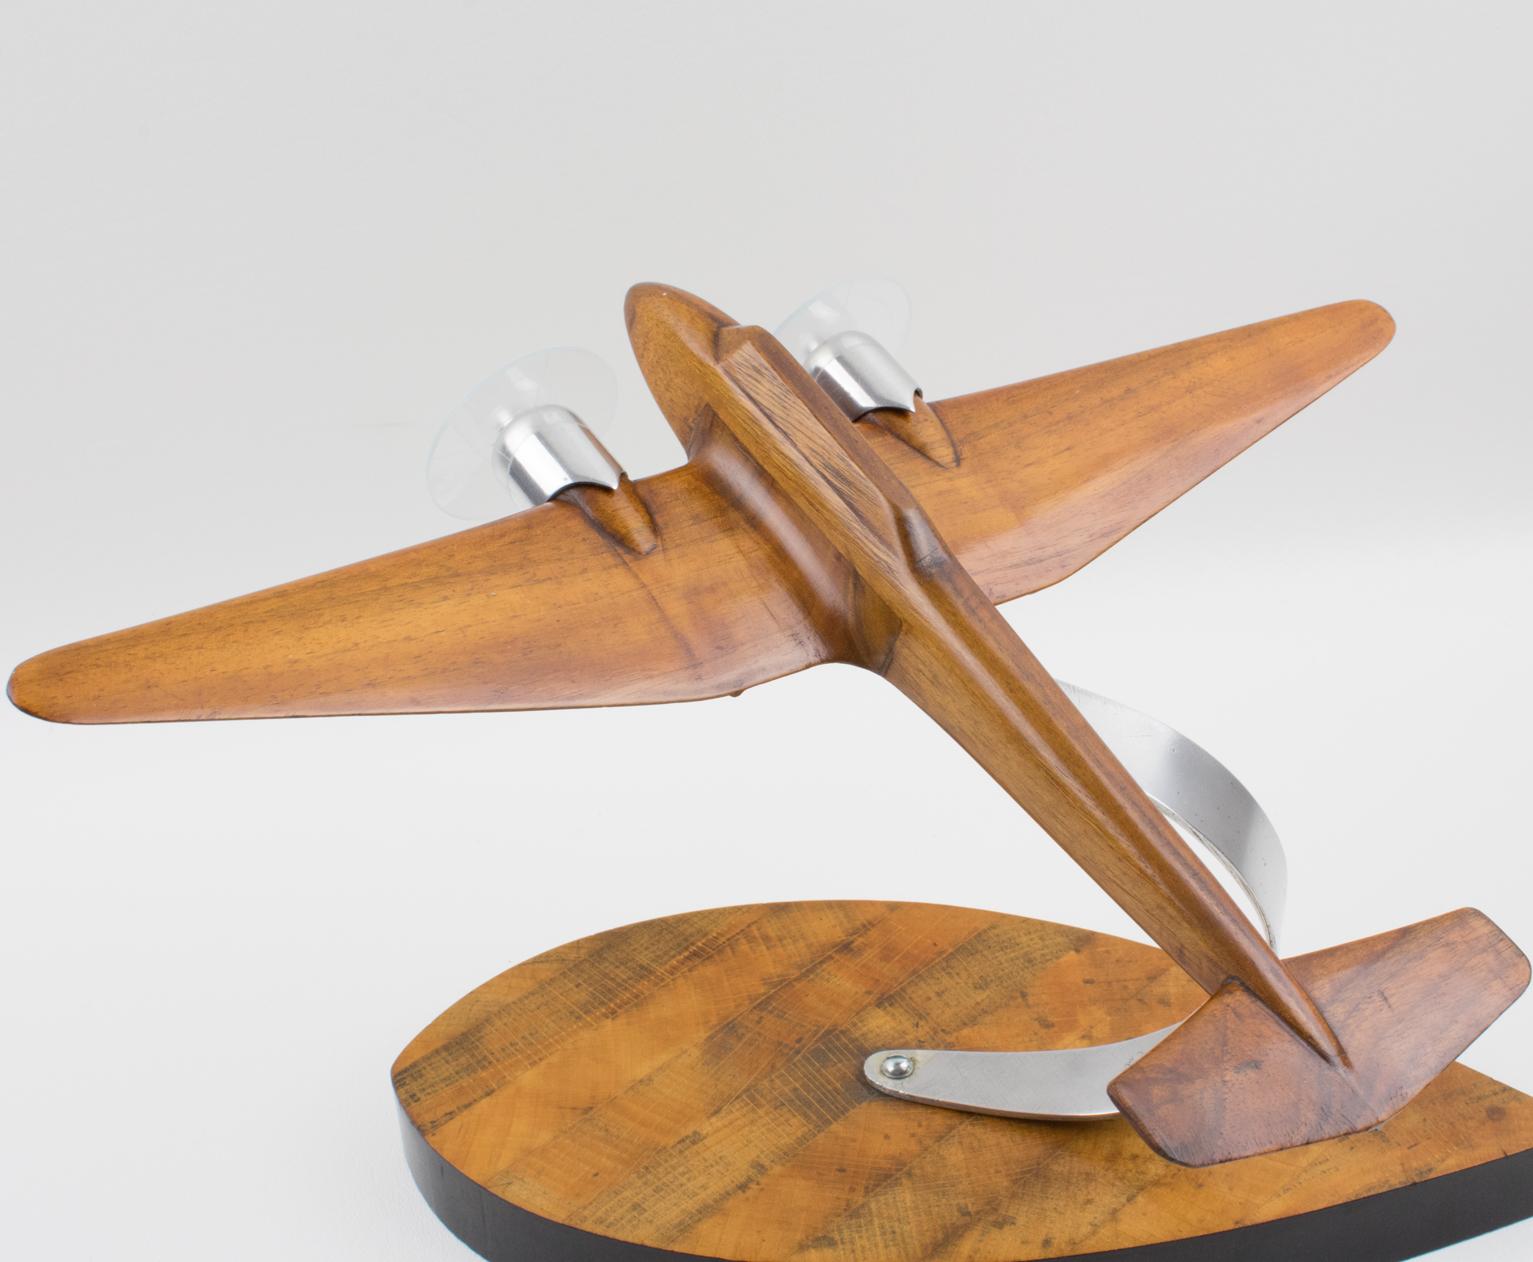 French Art Deco, 1940s Wooden and Aluminum Airplane Aviation Model 13